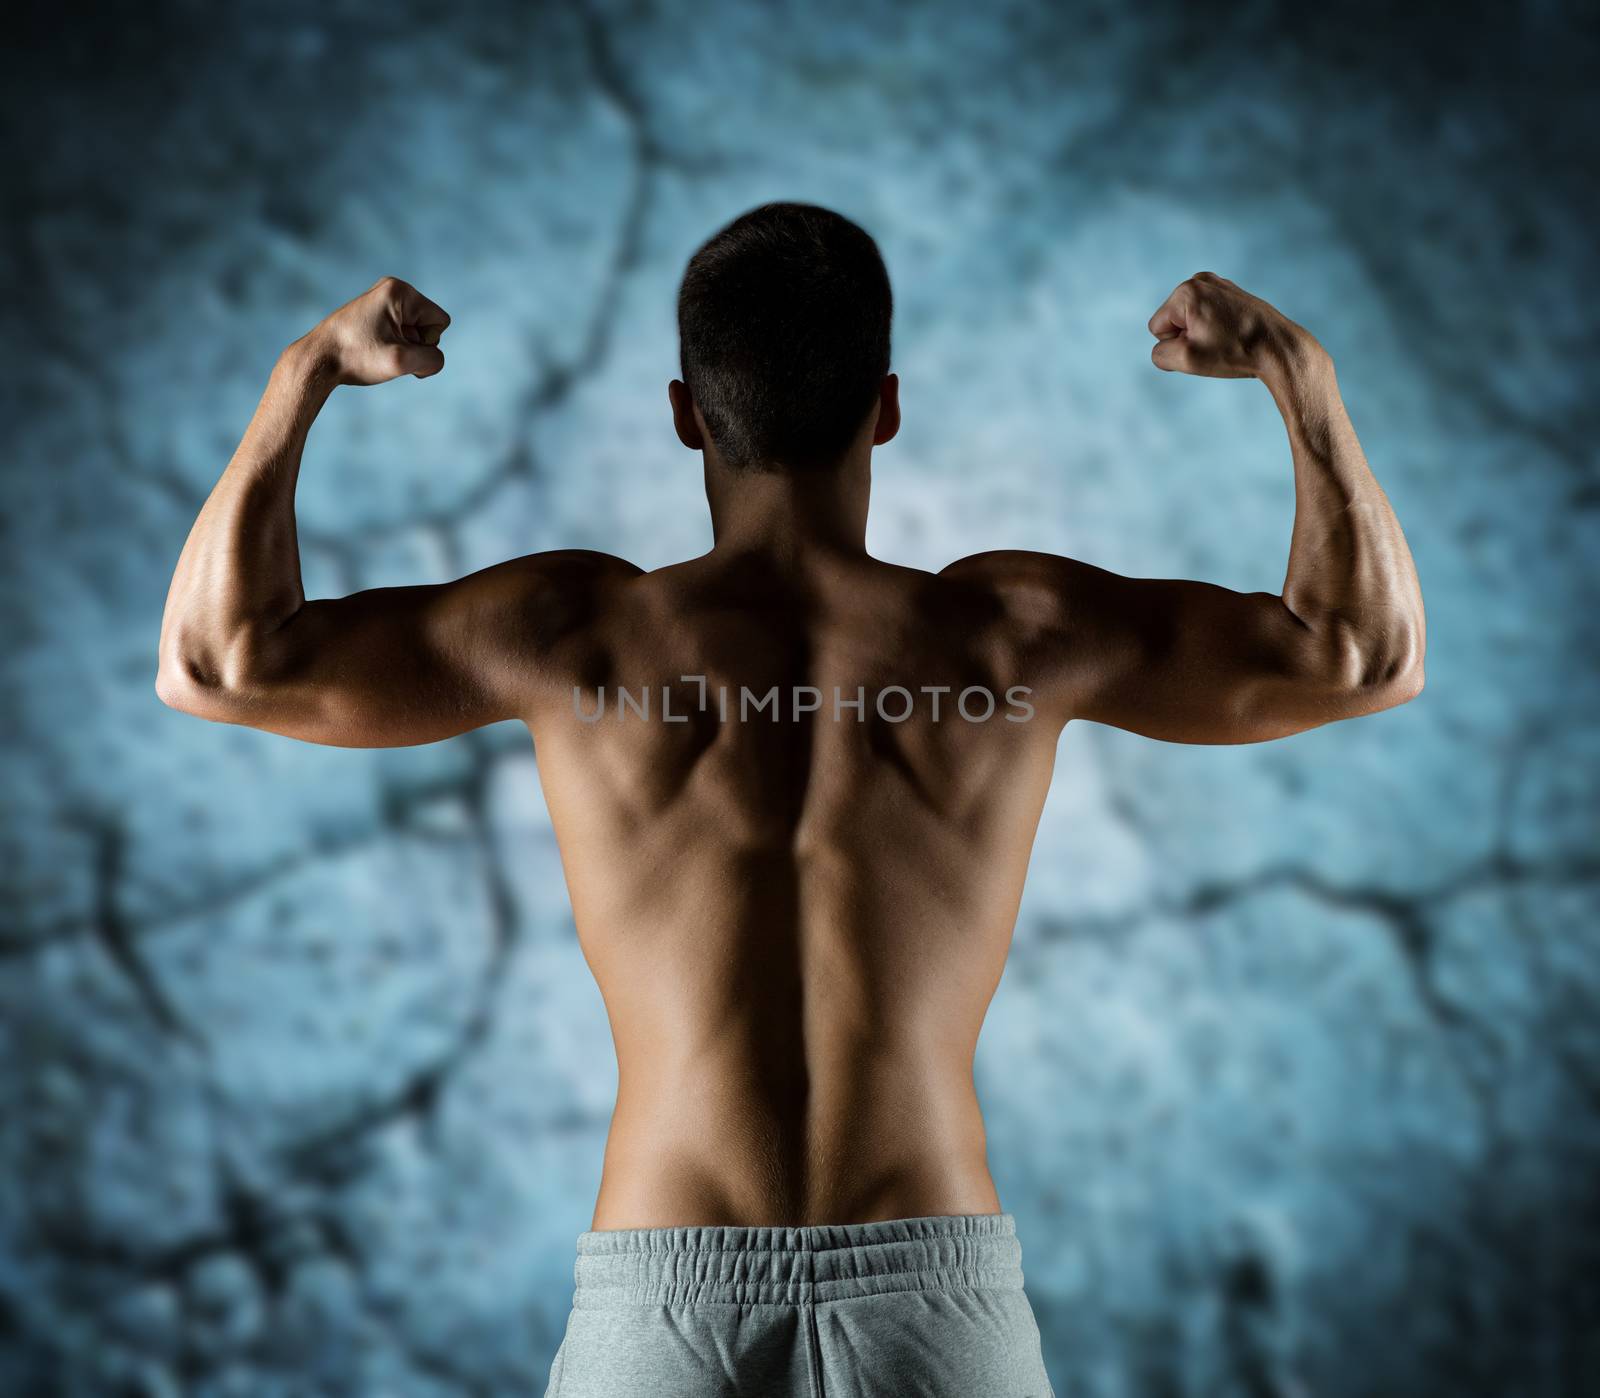 sport, fitness, bodybuilding, strength and people concept - young man or bodybuilder showing biceps over concrete wall background from back